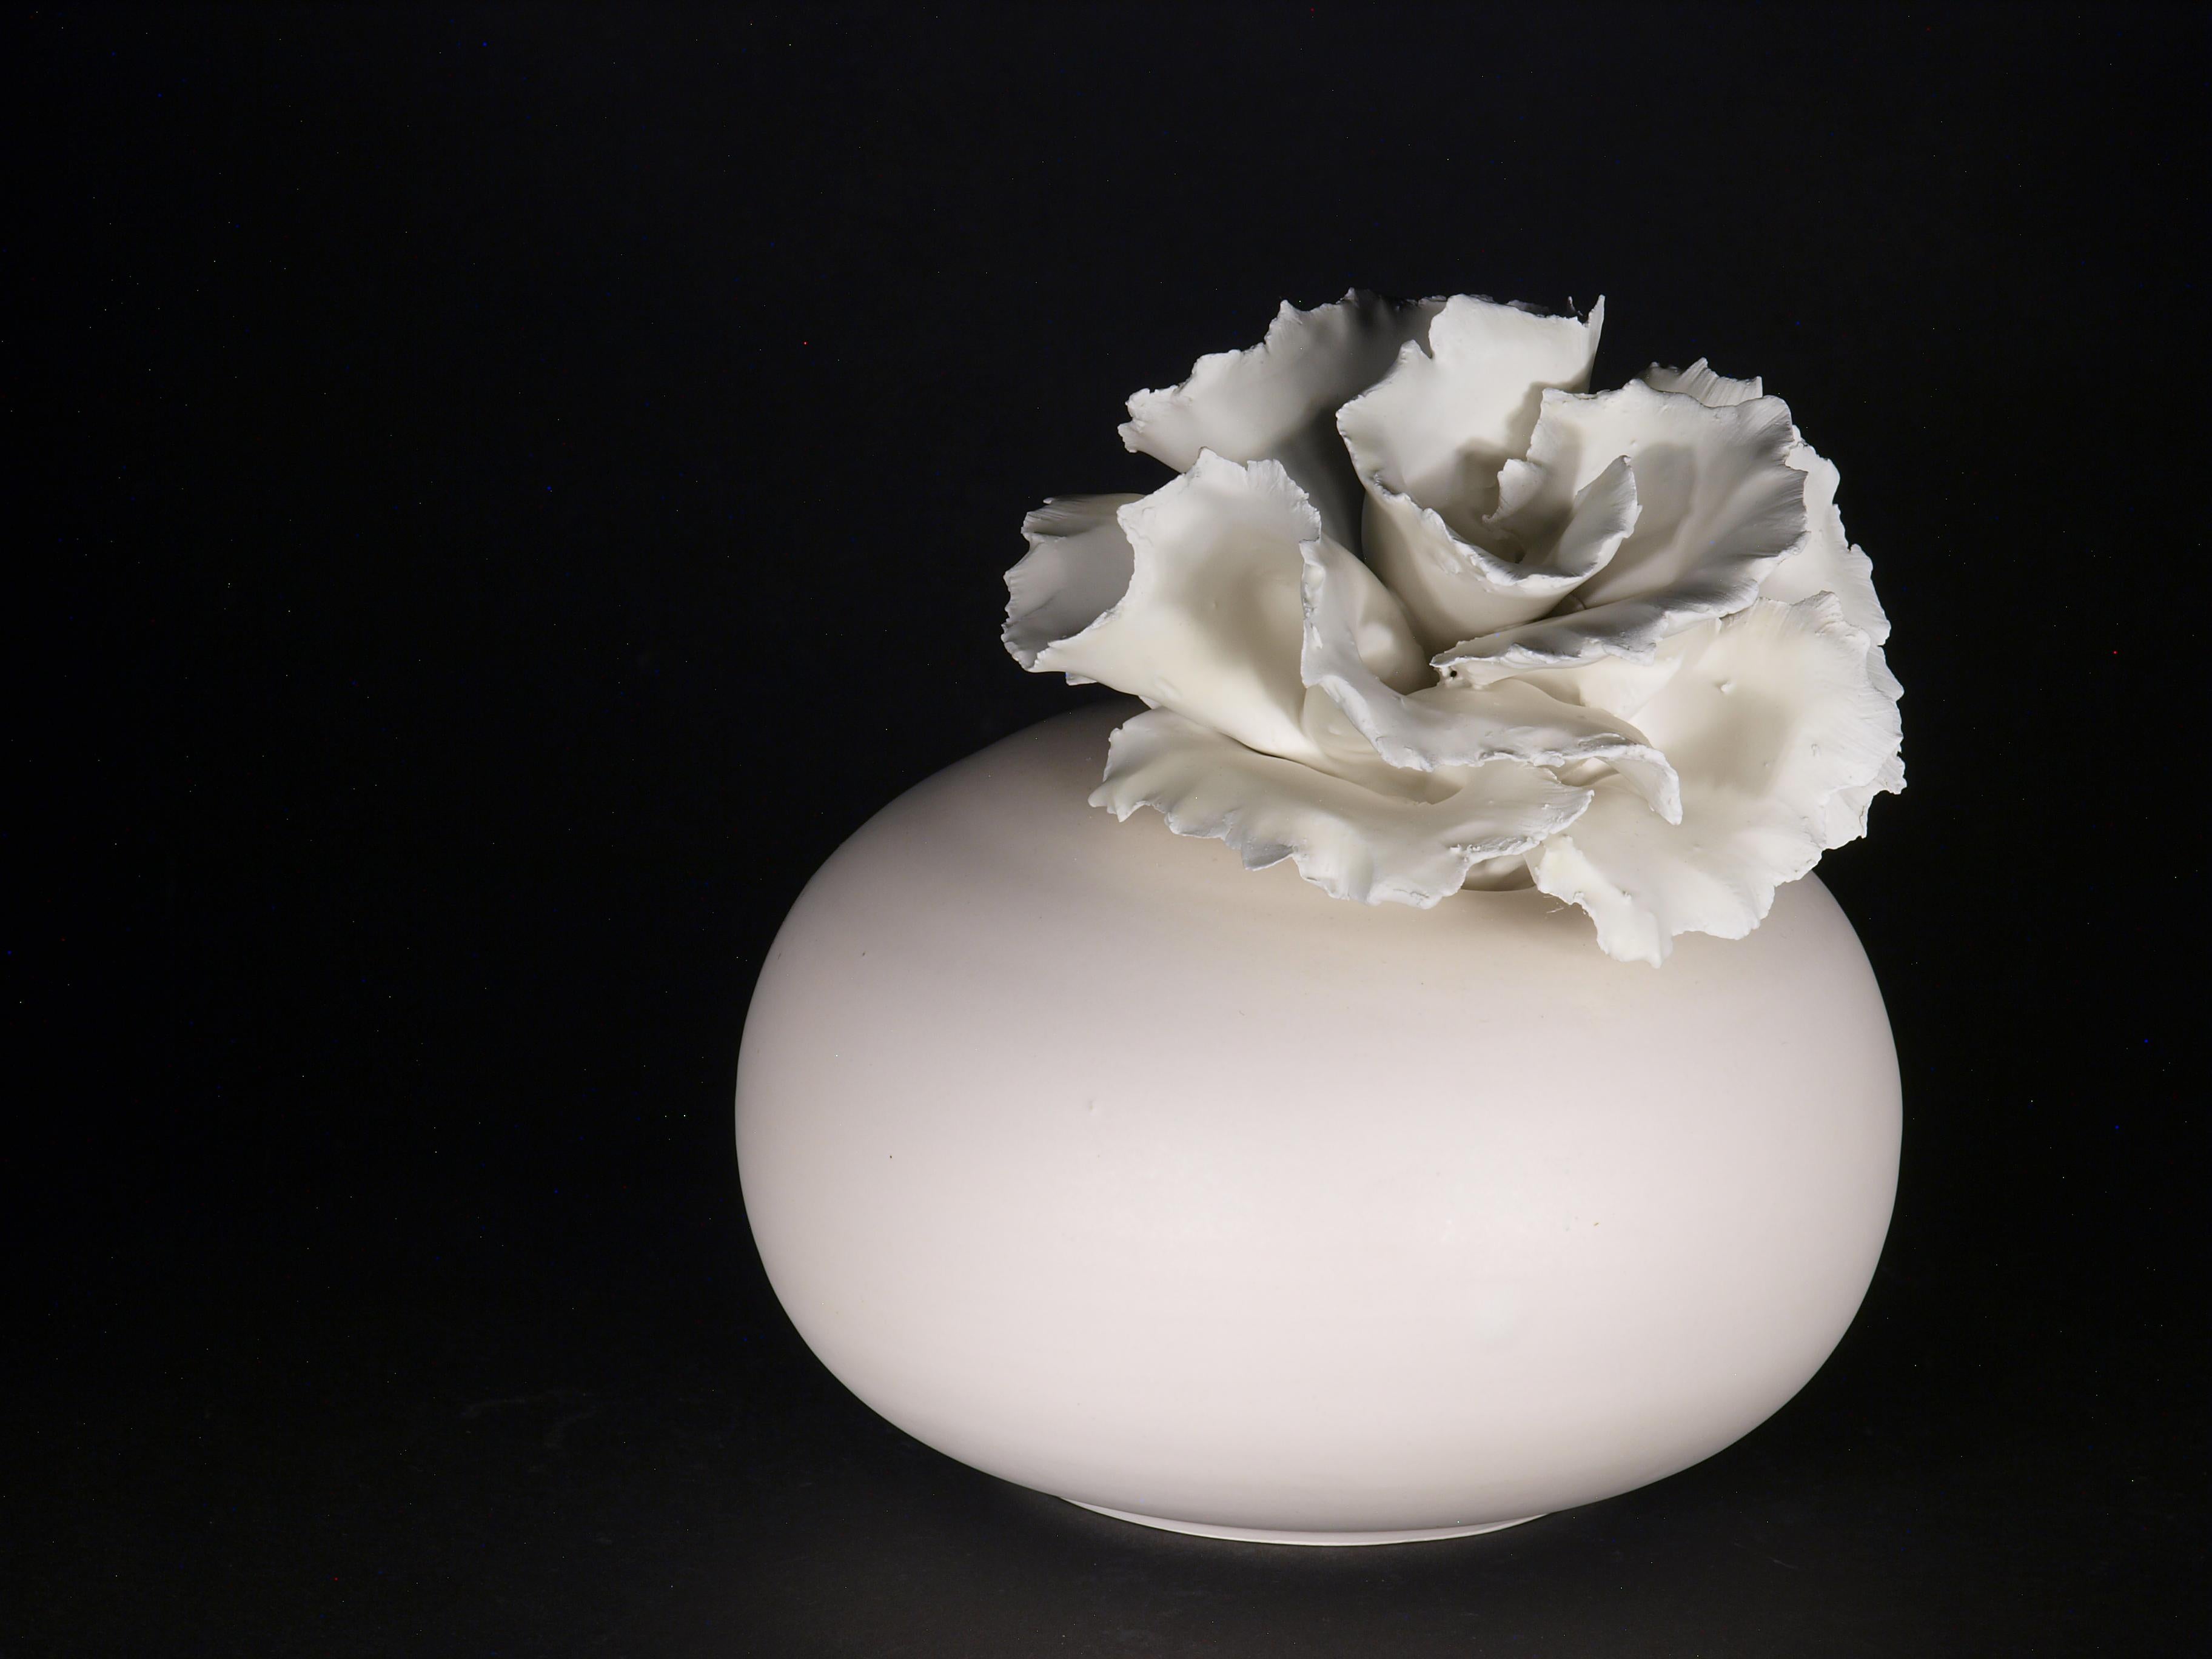 Small ceramic sculptures with peony by Antonietta Mazzotti Emaldi, 2018, Glazed earthenware (majolica) and 24ct gold, entirely handmade, unique piece. Customisation available in terms of colour of both for base and flower.

Antonietta Mazzotti